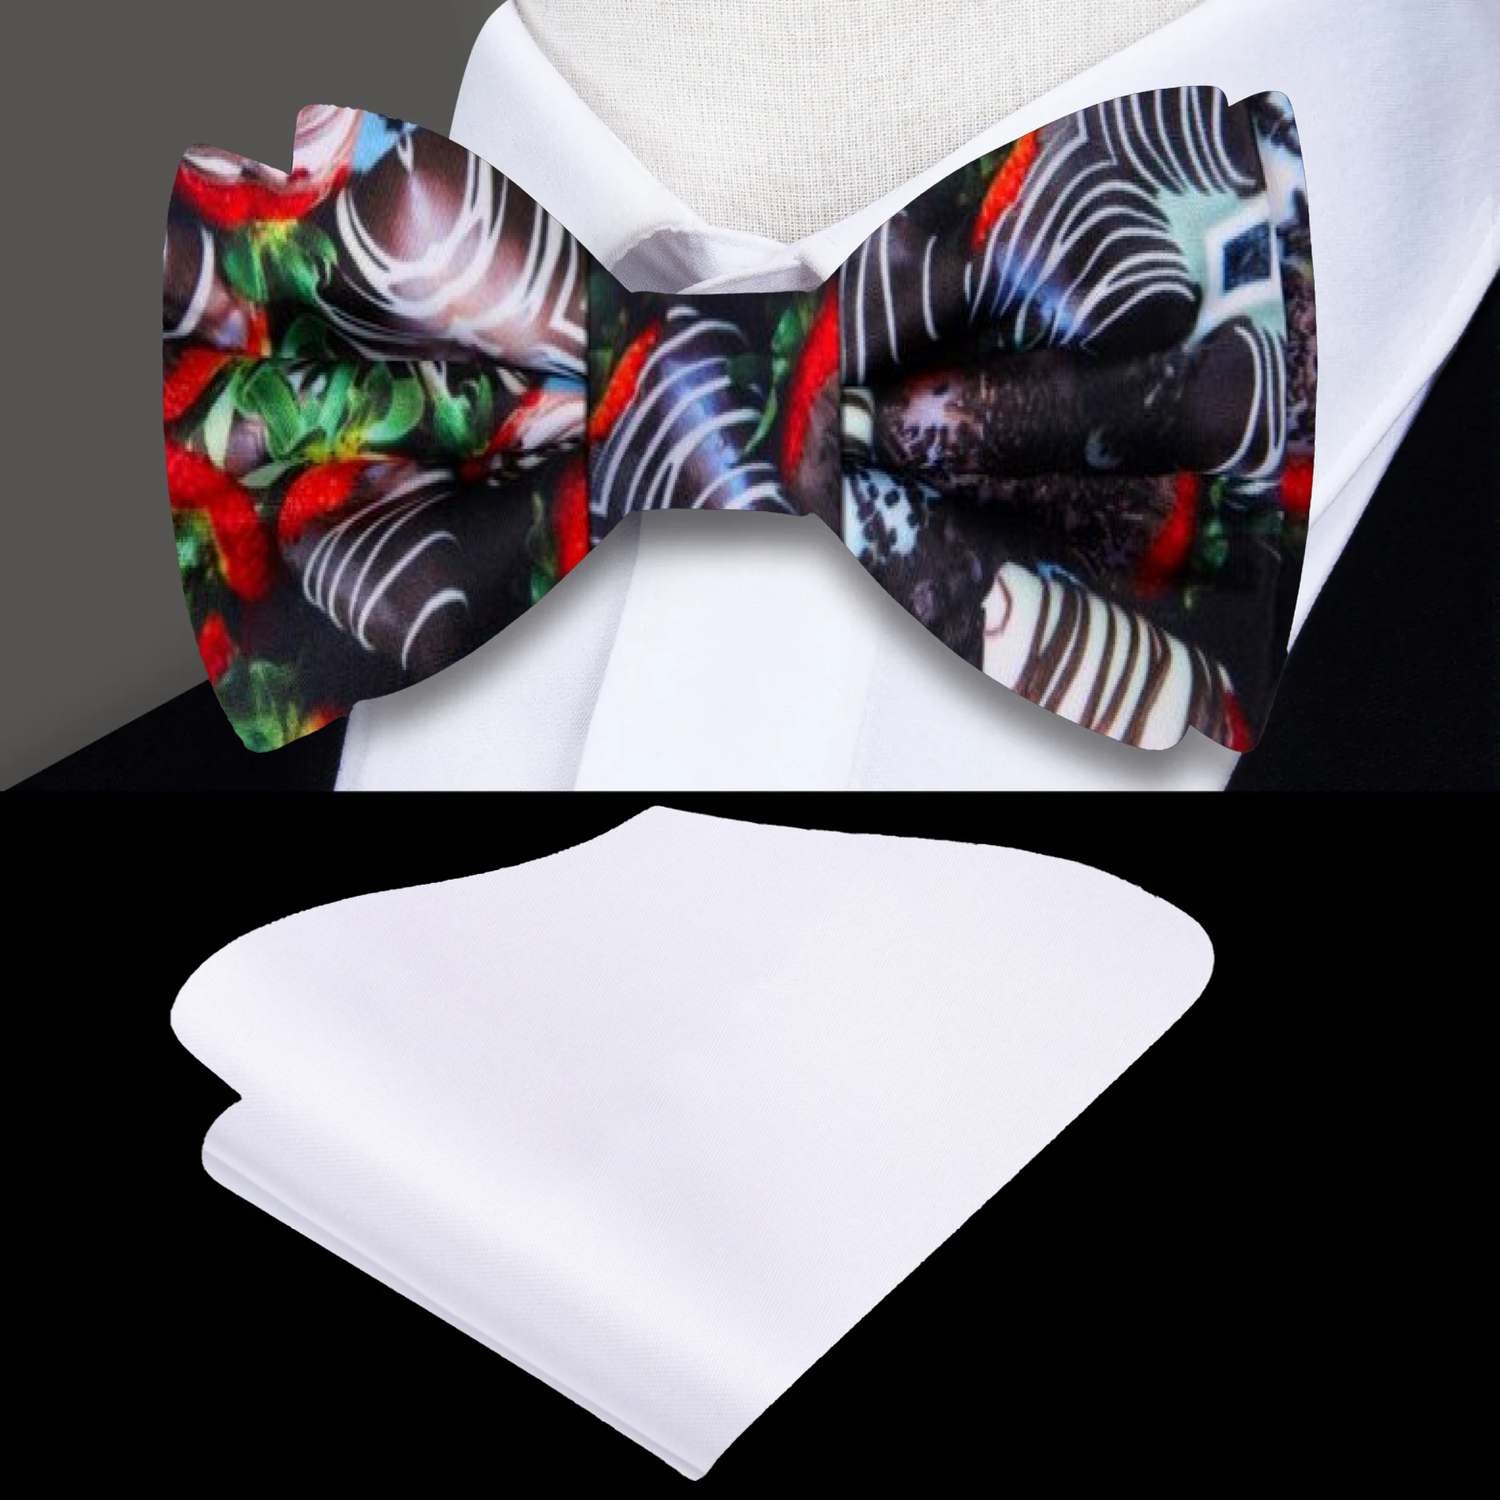 Red, Brown, White Chocolate Covered Strawberries Bow tie and White Pocket Square